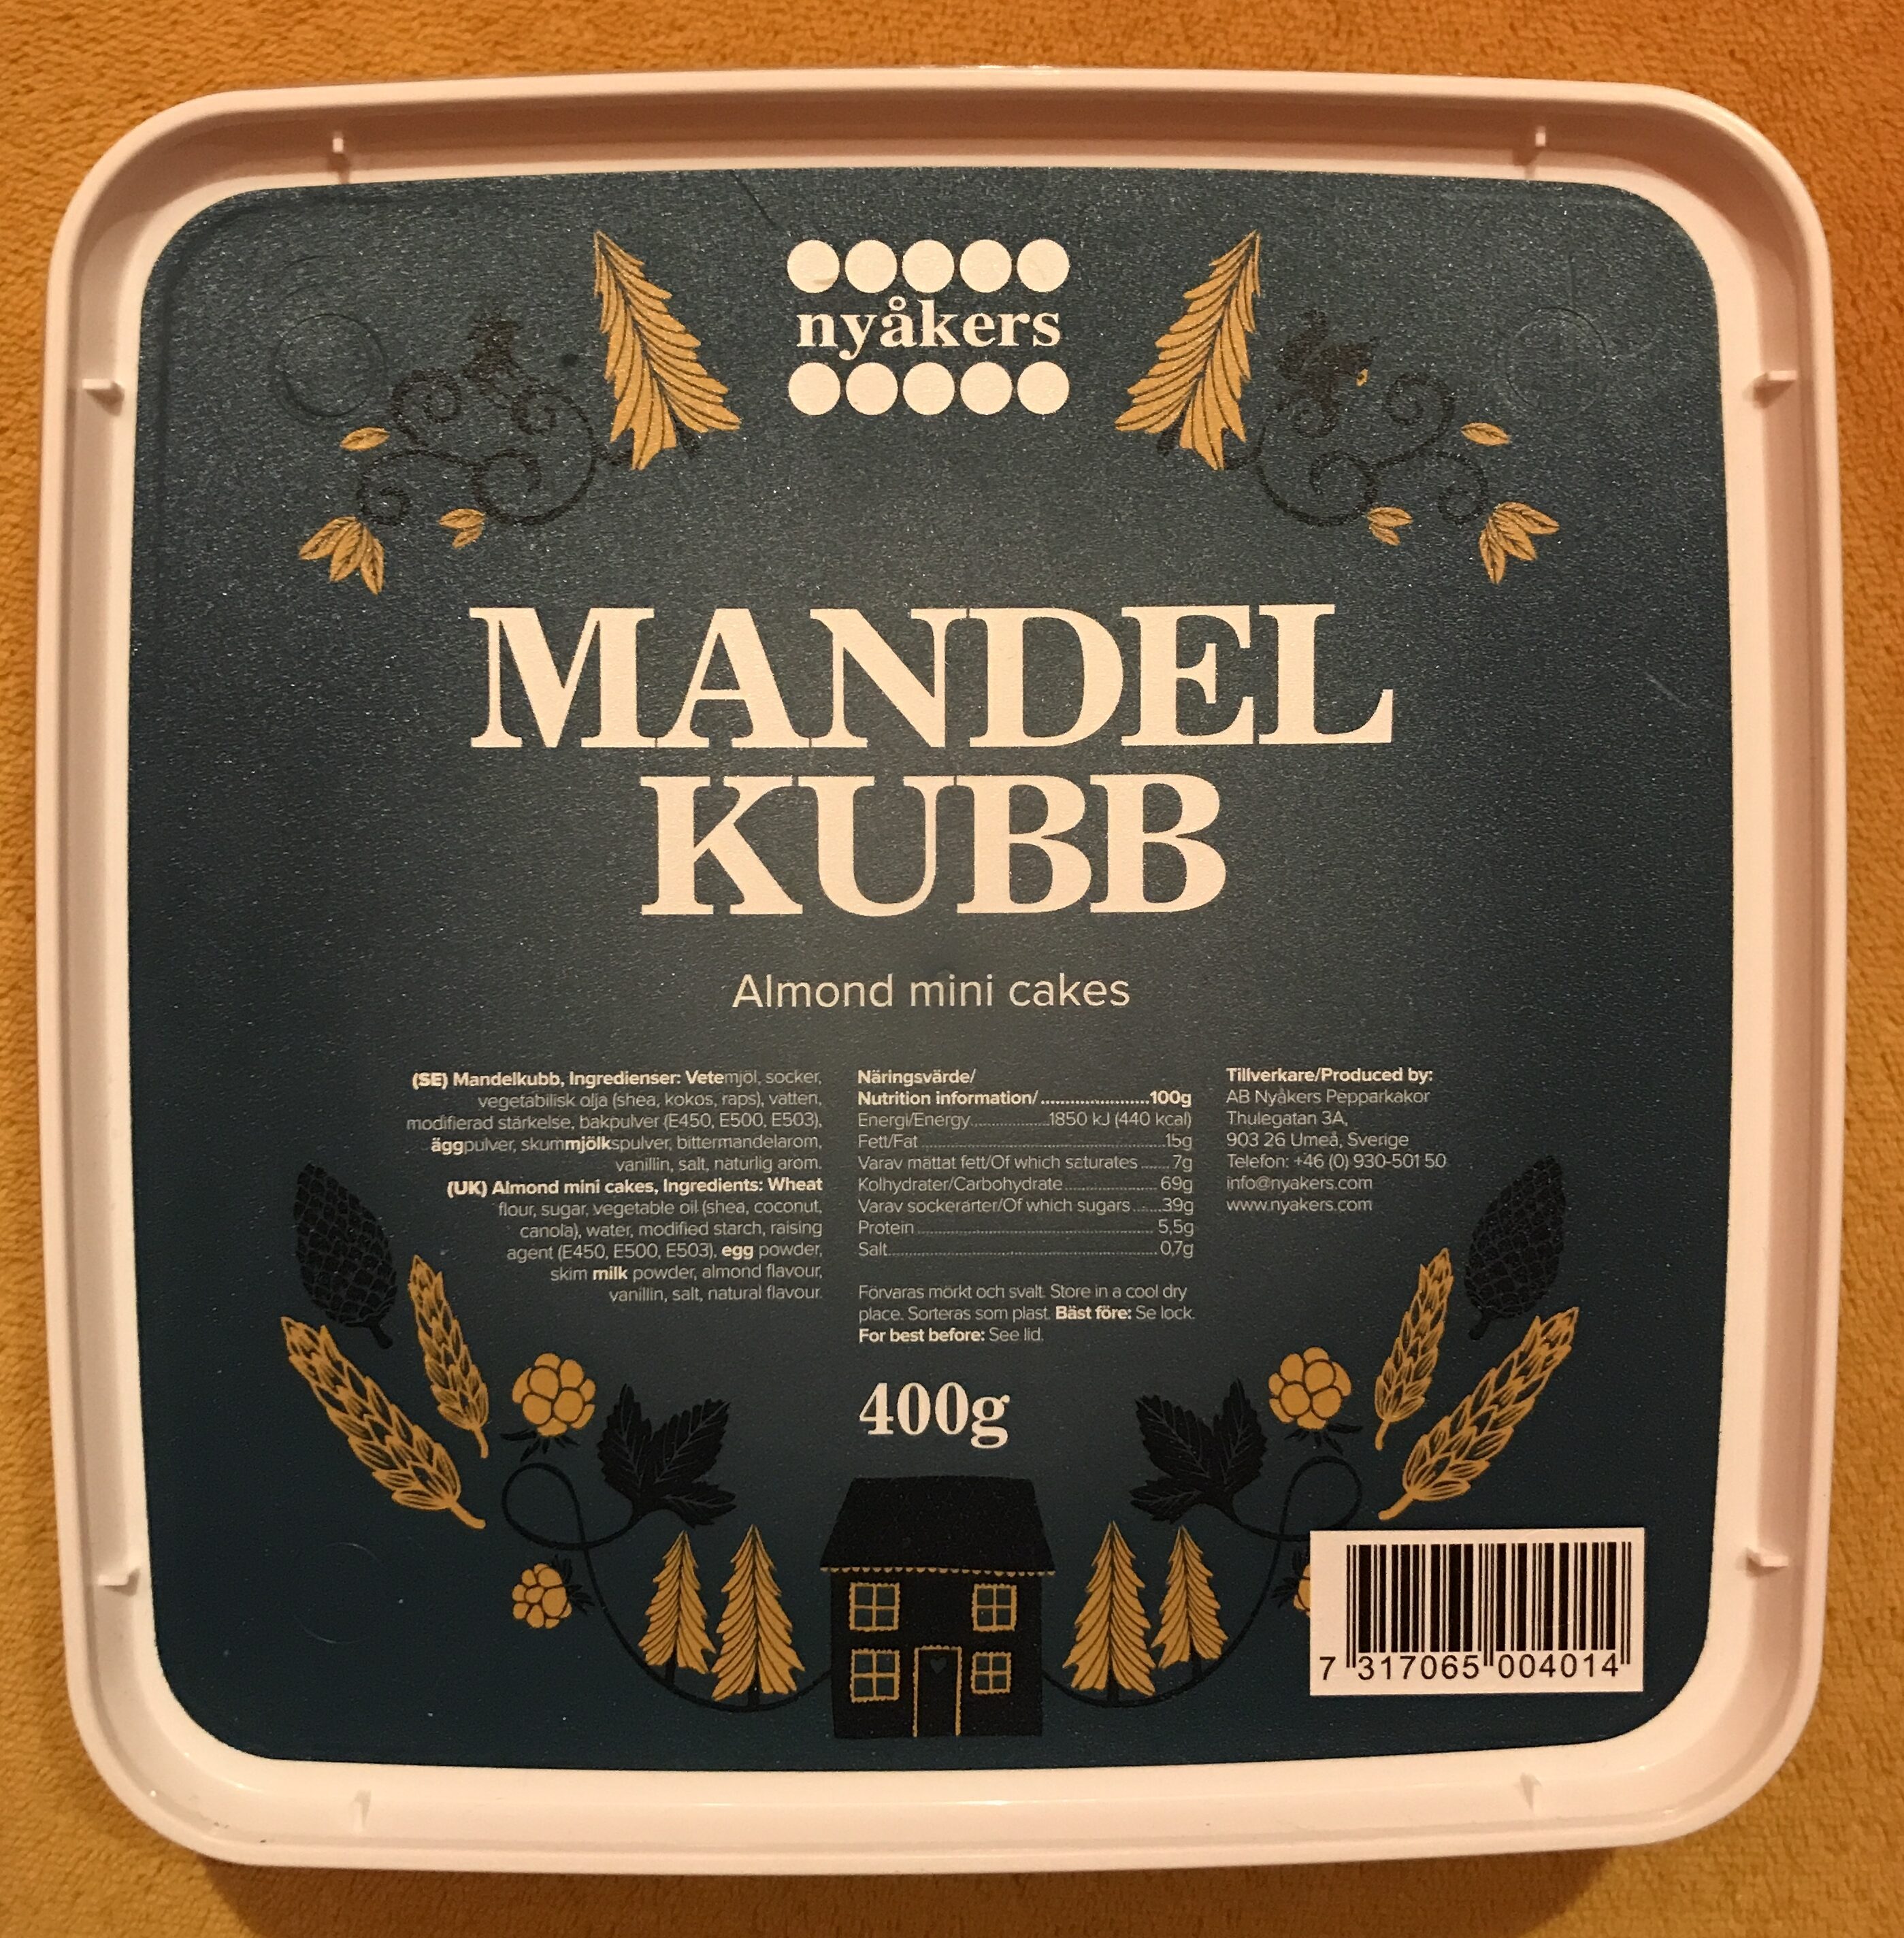 Mandel Kubb - Recycling instructions and/or packaging information